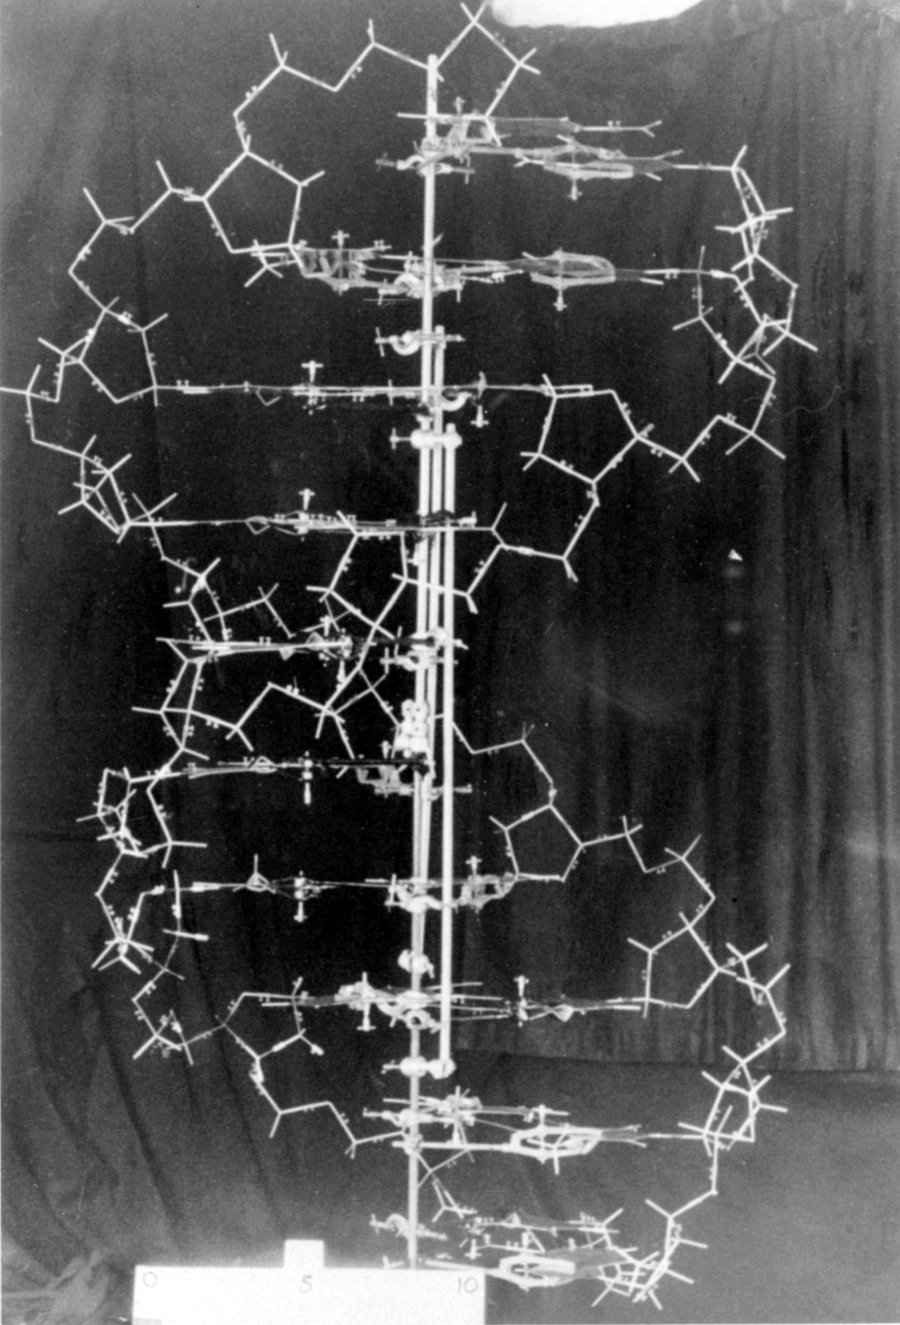 The original DNA demonstration model, designed by James Watson and Francis Crick.